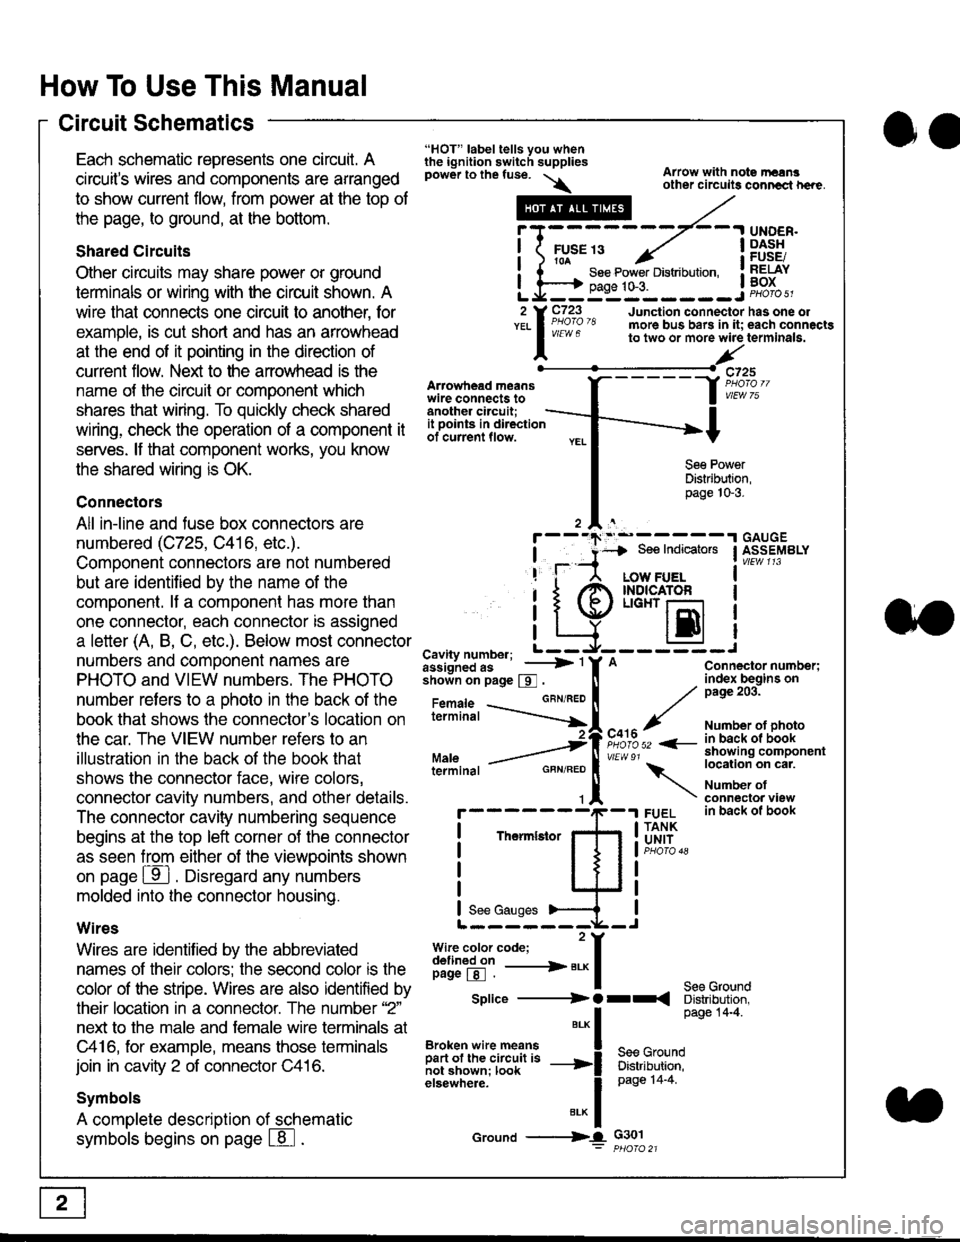 HONDA CIVIC 1998 6.G Workshop Manual How To Use This Manual
Circuit Schematics
oa
Each schematic represents one circult. A
circuits wires and components are arranged
to show current flow, from power at the top of
the page, to ground, at